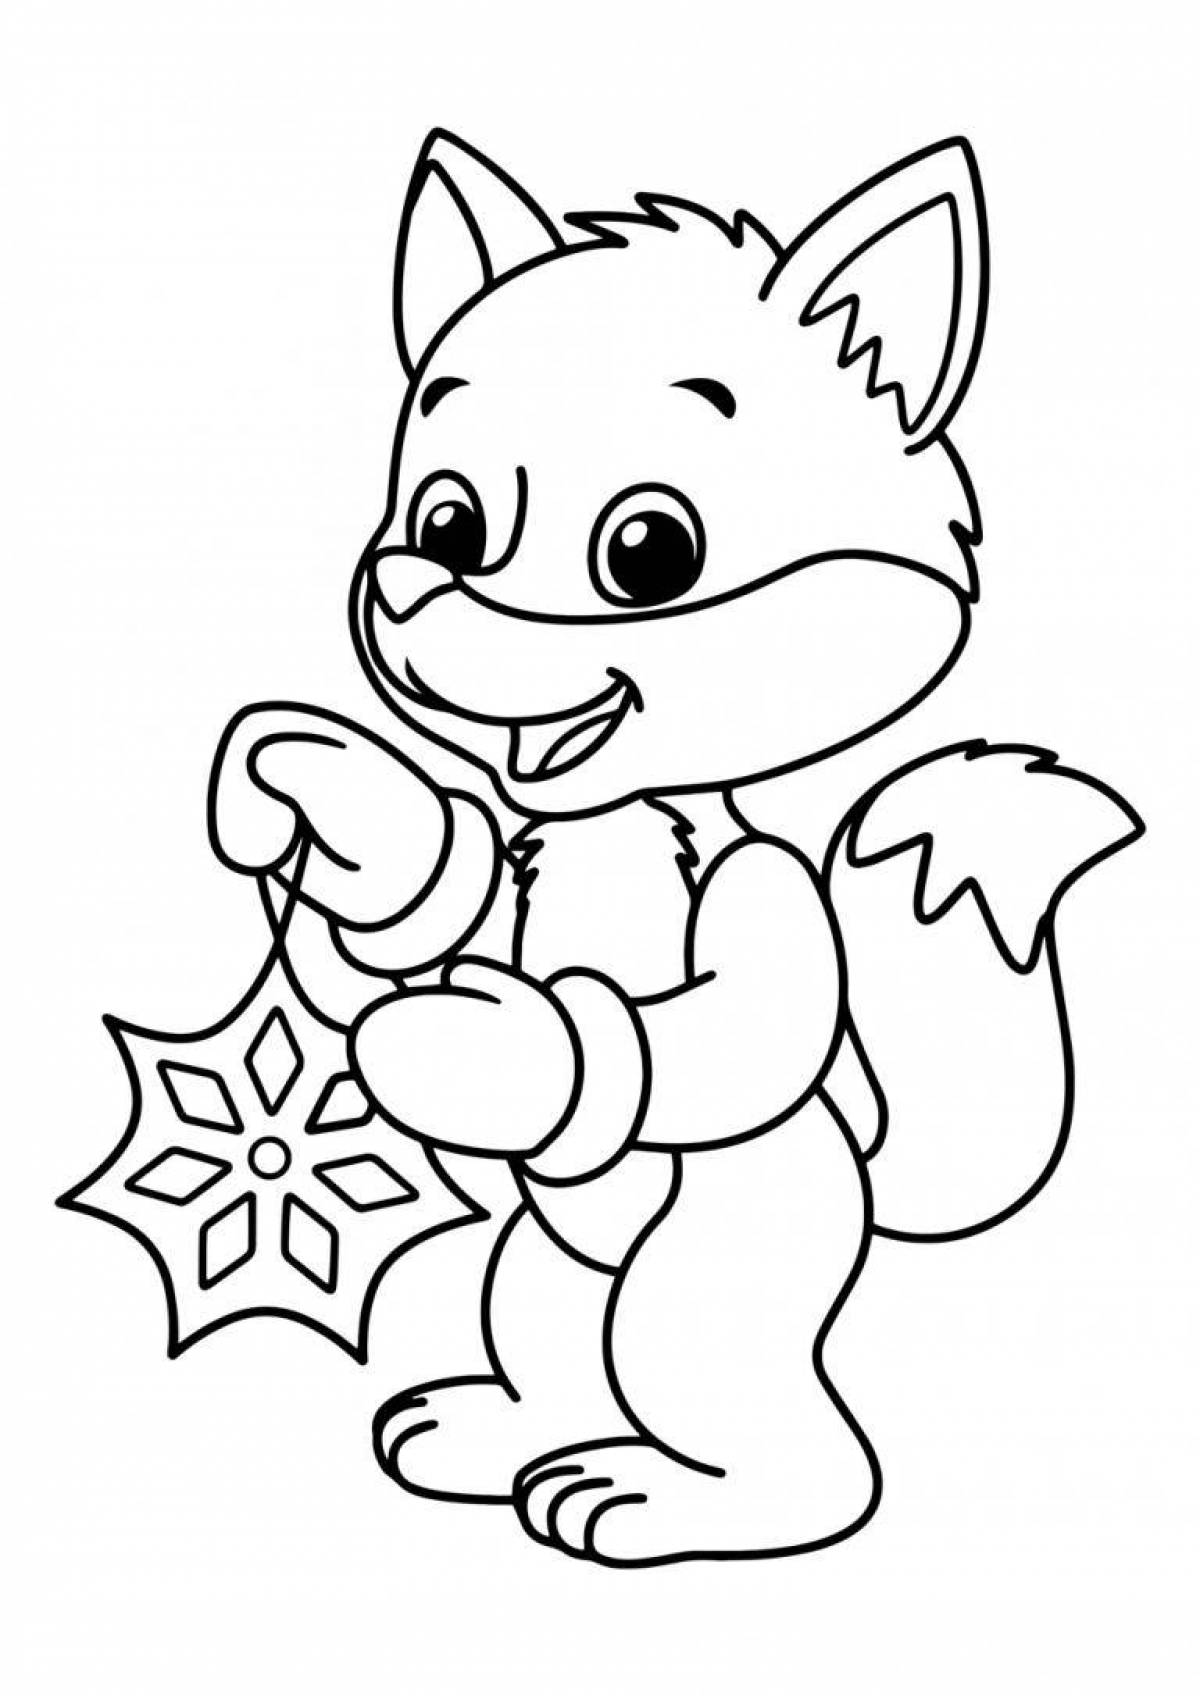 Bright Christmas coloring wolf